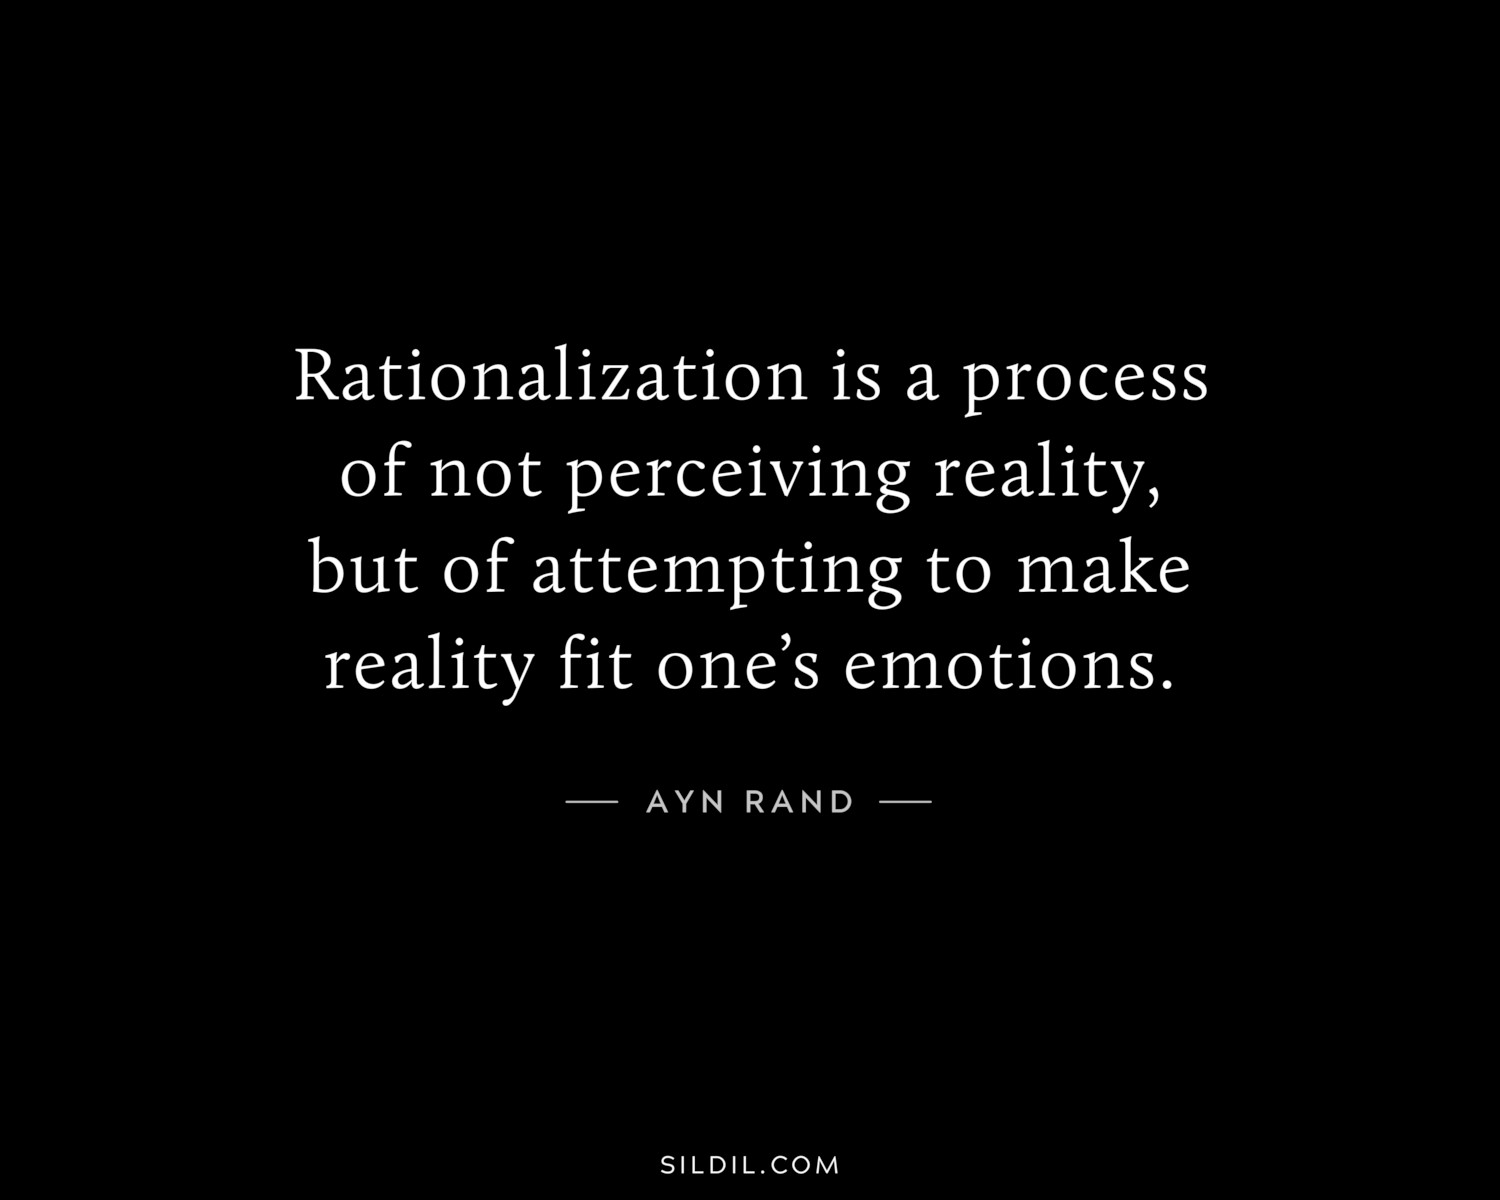 Rationalization is a process of not perceiving reality, but of attempting to make reality fit one’s emotions.